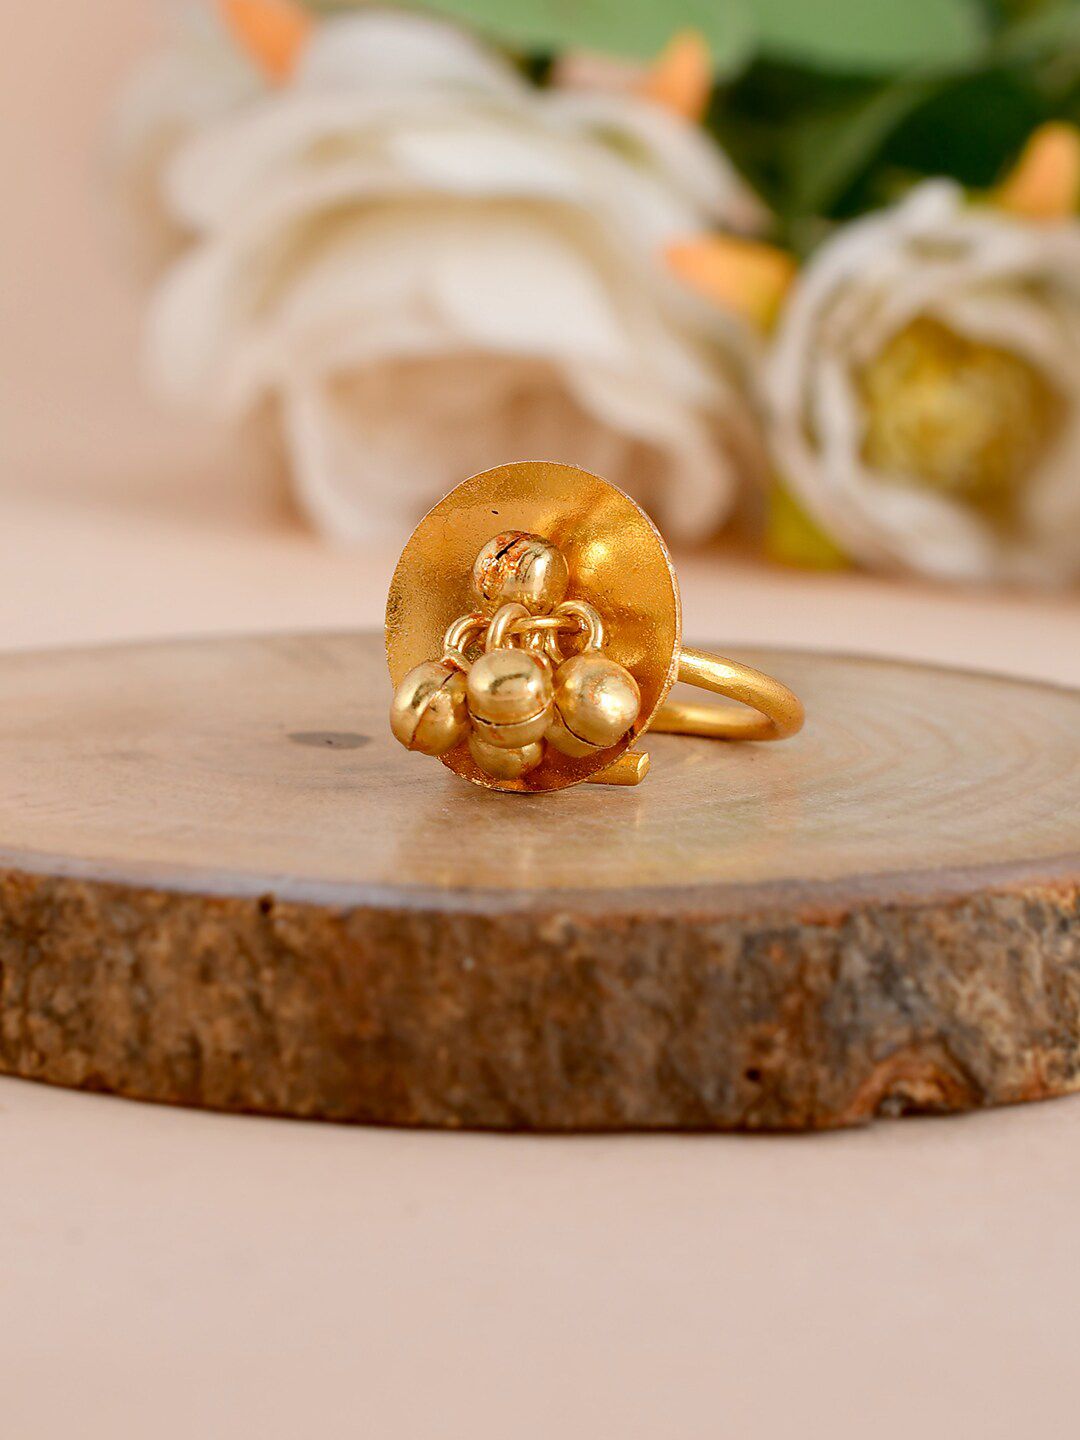 Silvermerc Designs Gold-Plated Disc Ghungroo Handcrafted Adjustable Finger Ring Price in India